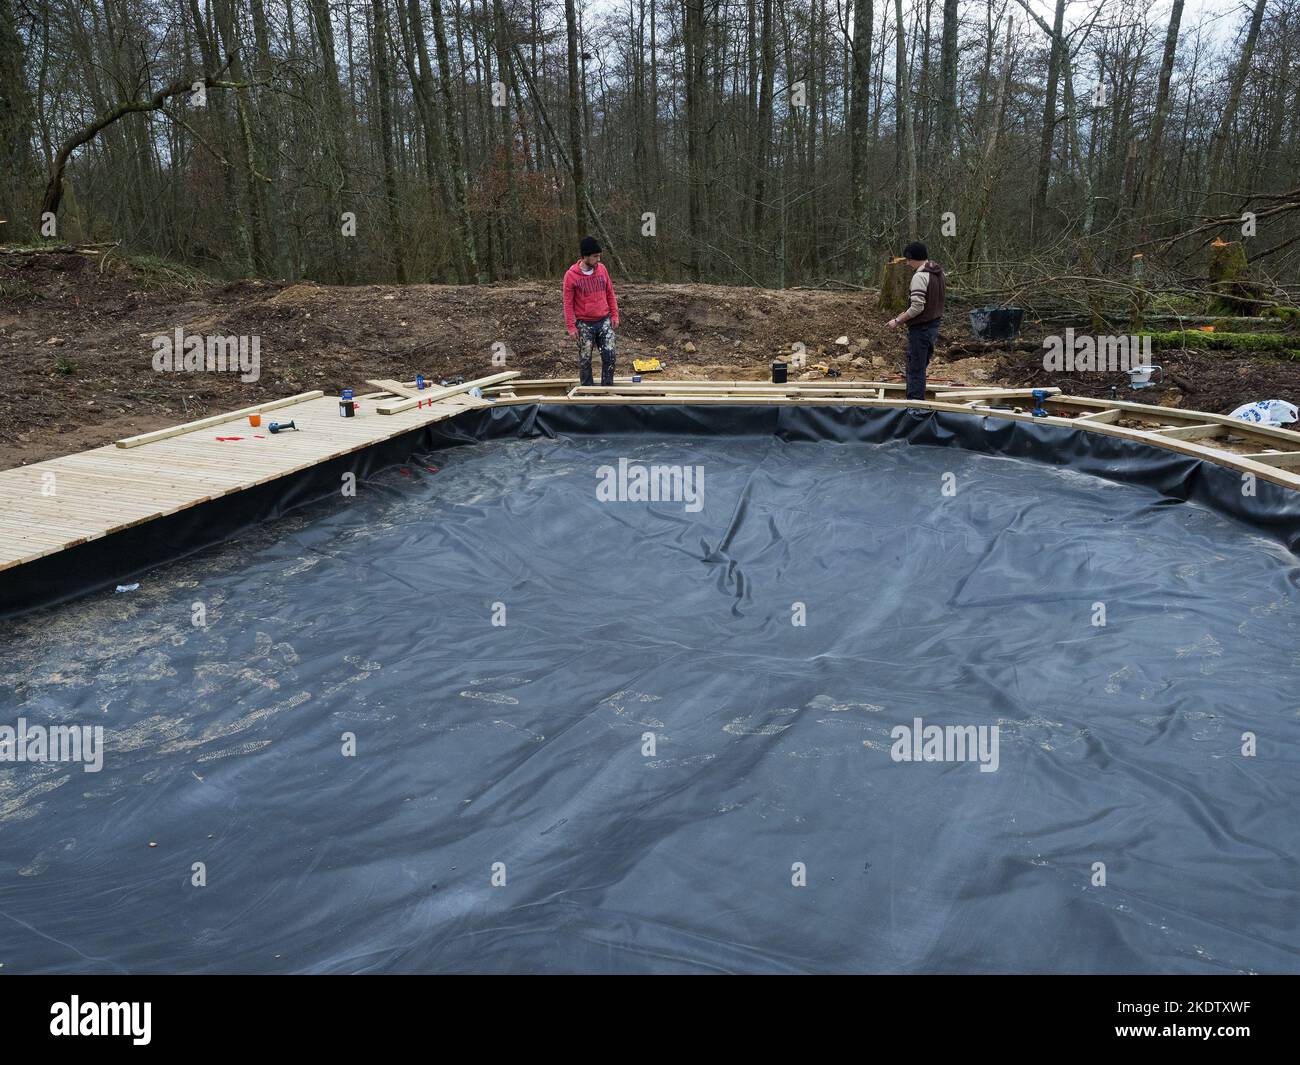 Preparatory work for construction of educational dipping pond with the liner in place, Blashford Lakes Nature Reserve, Hampshire and Isle of Wight Wil Stock Photo